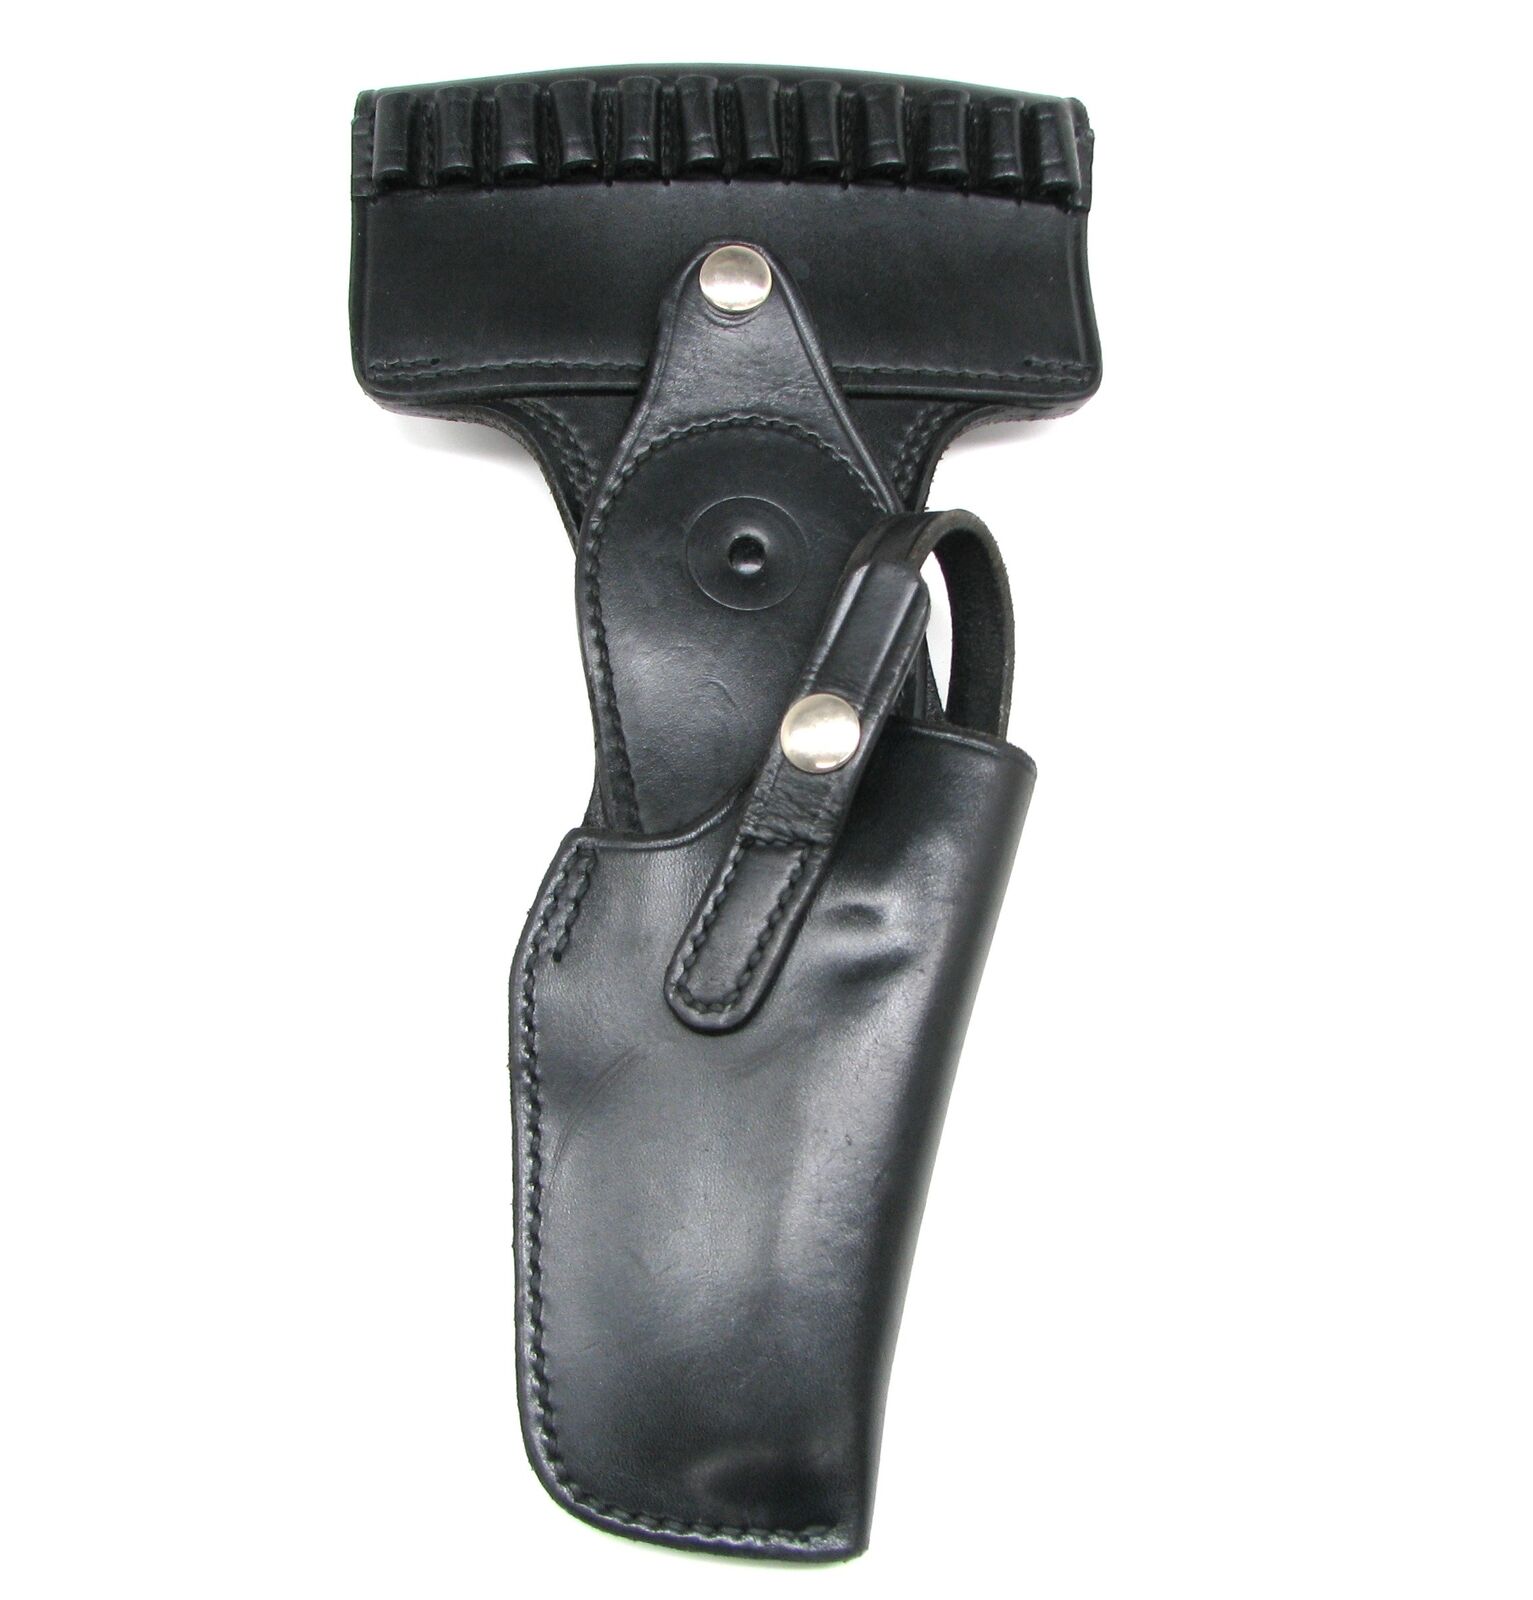 Swivel Holster with cartridge loops fits 4-inch revolvers